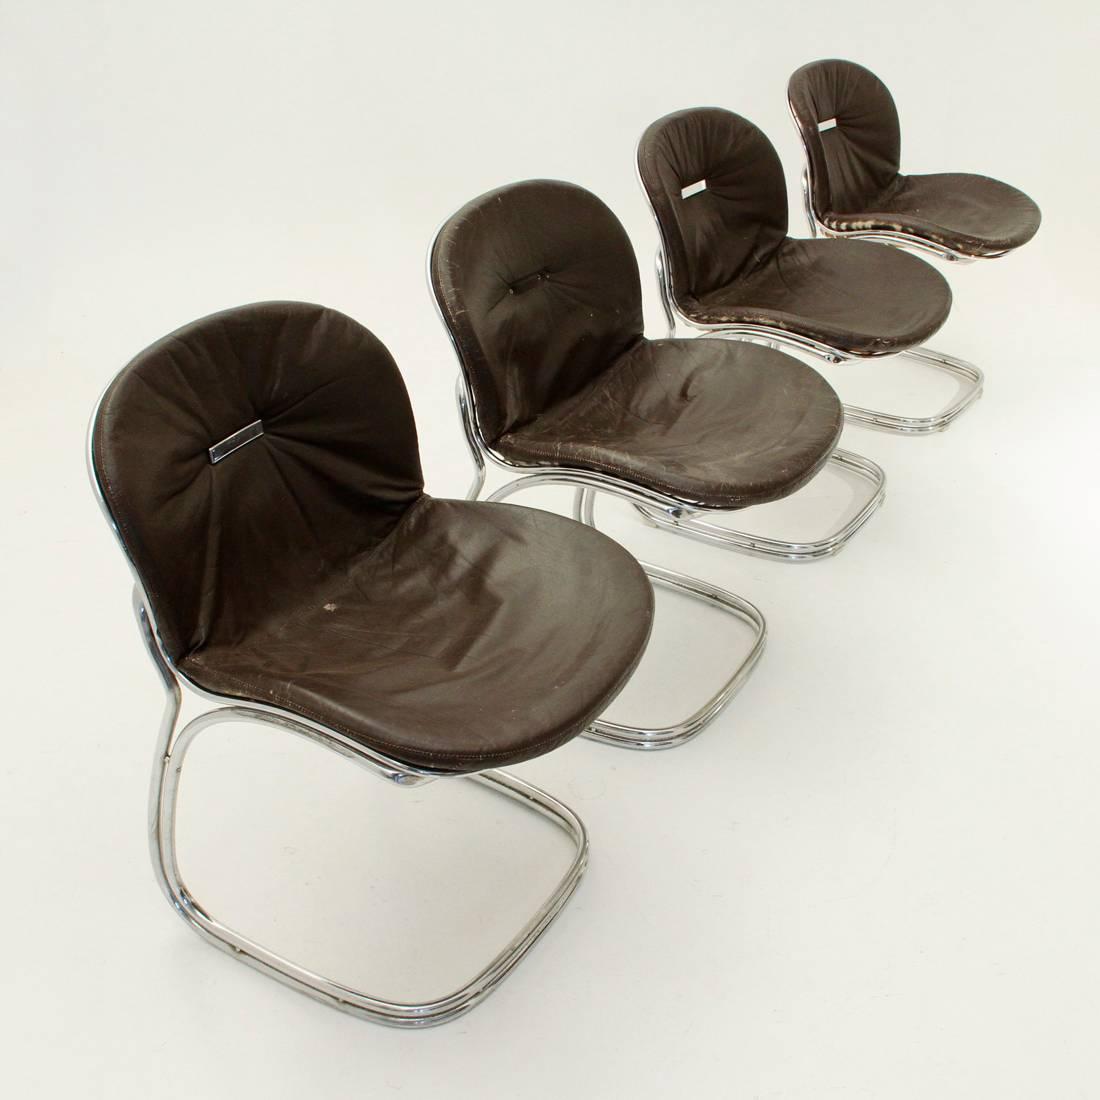 Chairs produced by RIMA in the 1970s on Gastone Rinaldi's design.
Chromed metal frame.
Upholstered seat and back, with brown lined leather cushion.
Good general condition, skin with some marks, missing some plastic feet and a hanger cushion